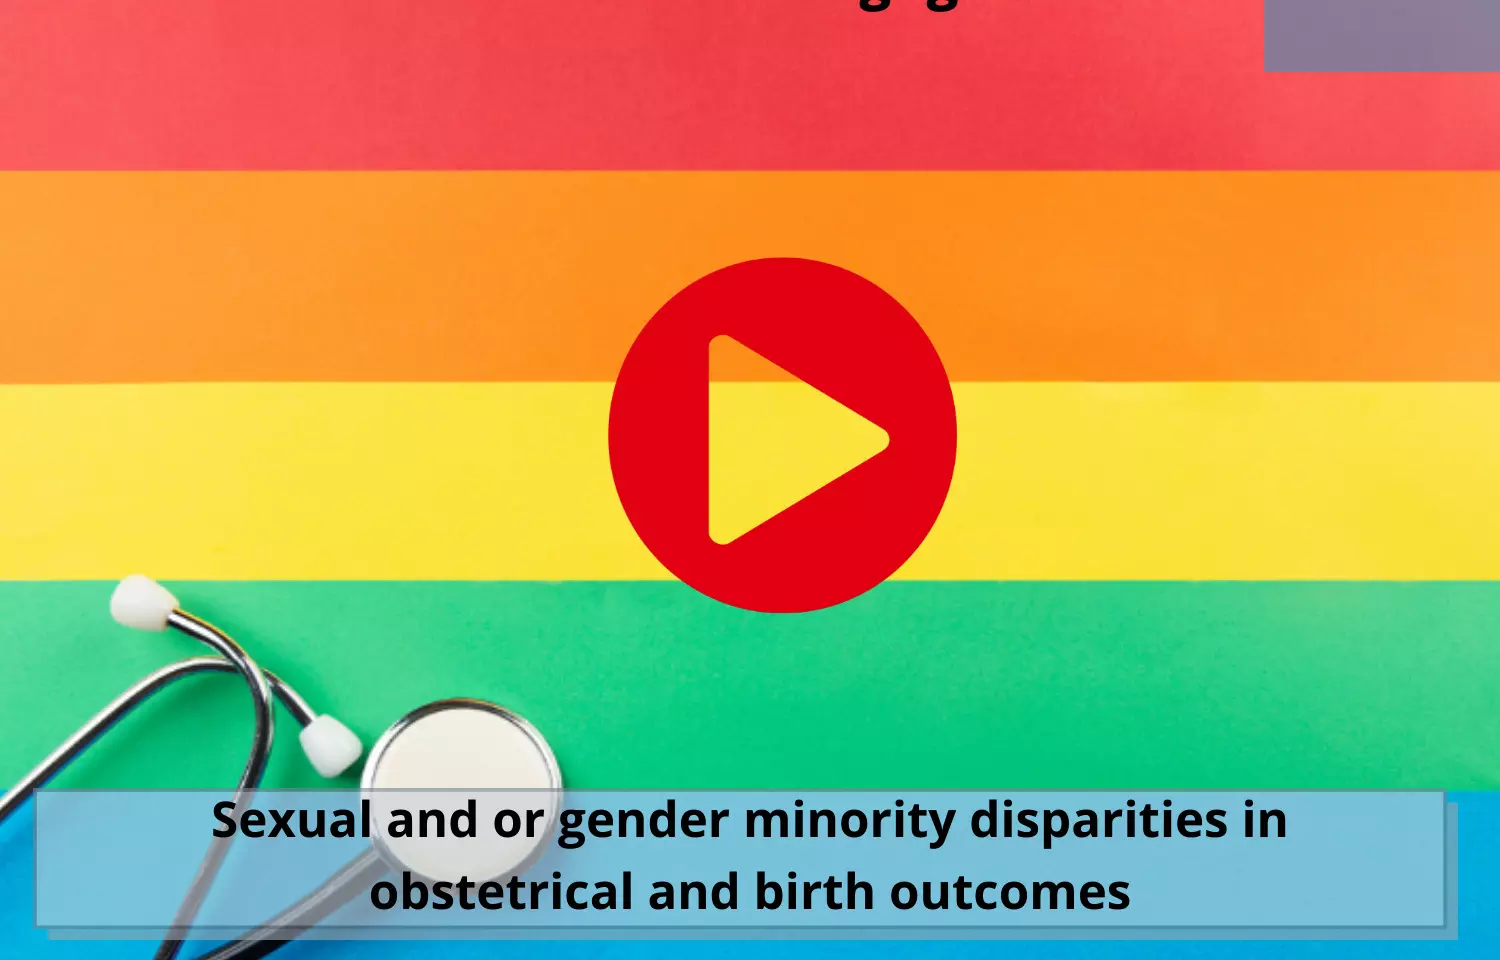 Sexual and or gender minority disparities in obstetrical and birth outcomes